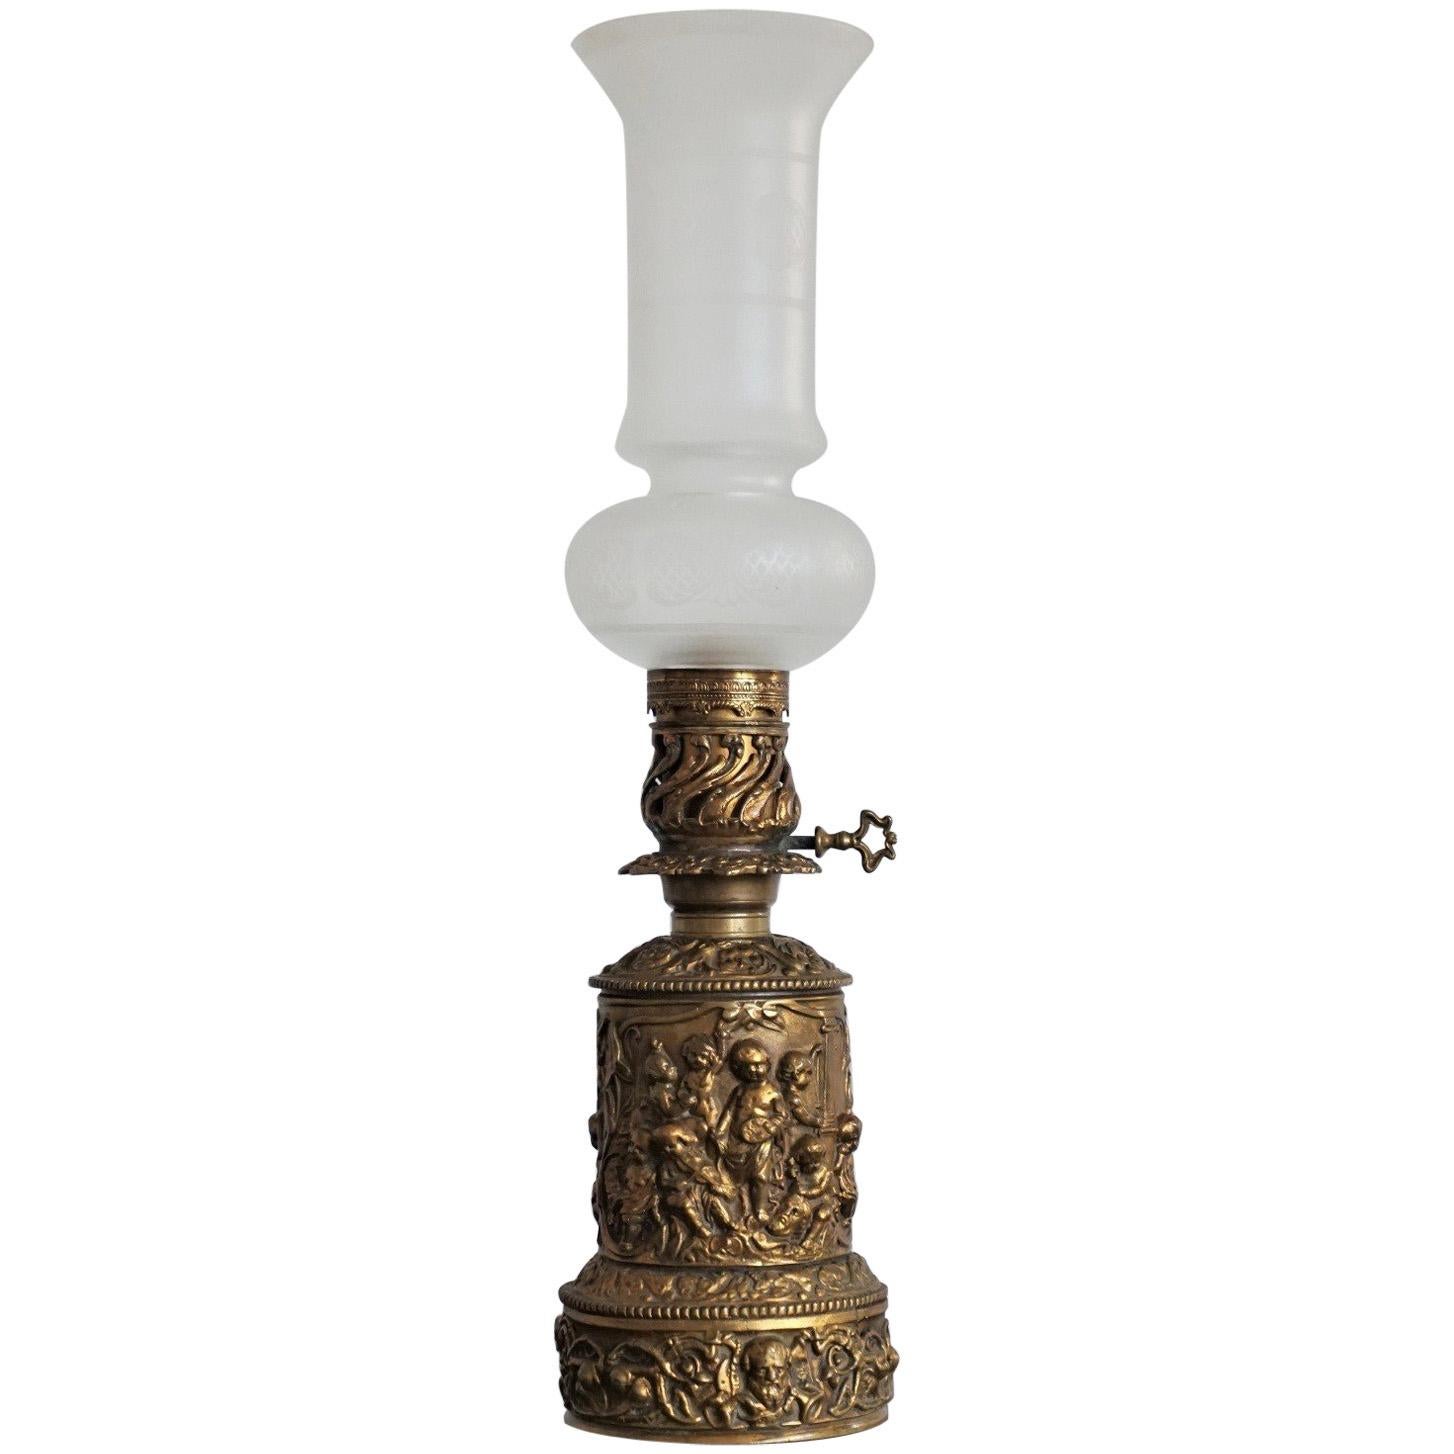 19th Century Victorian Gilt Bronze Oil Lamp Converted to Electric, Table Lamp